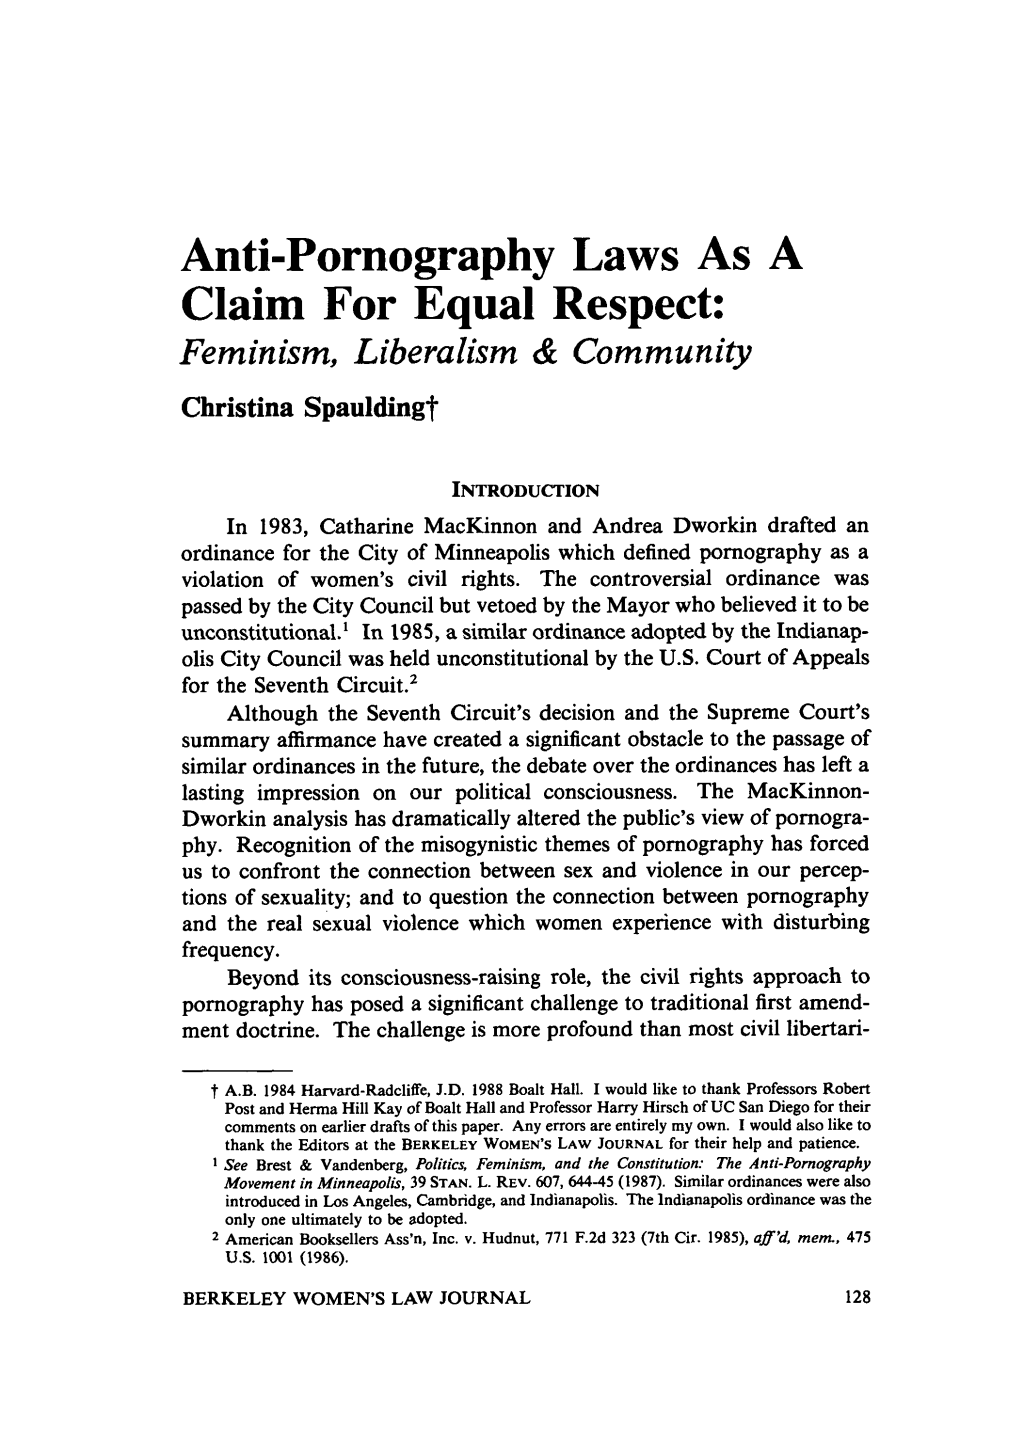 Anti-Pornography Laws As a Claim for Equal Respect: Feminism, Leberalism